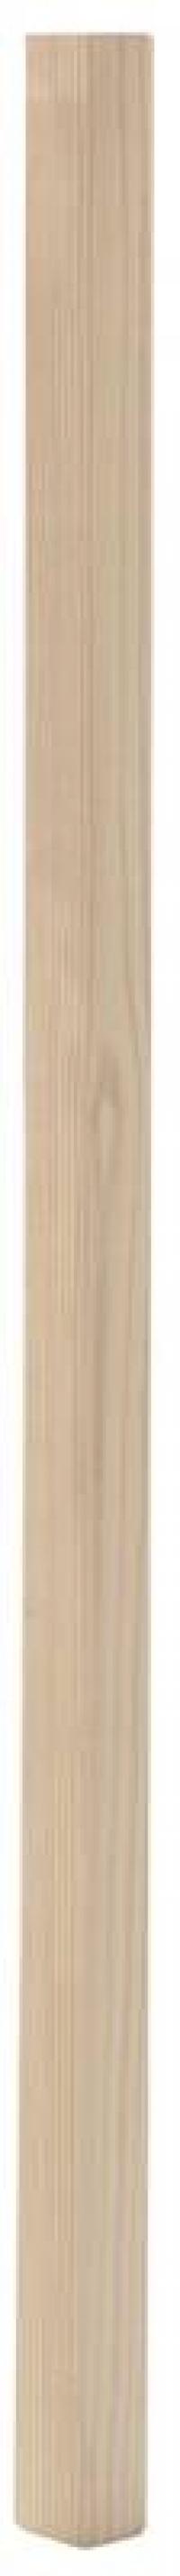 2X2-36" P/T BALUSTER CLEAR